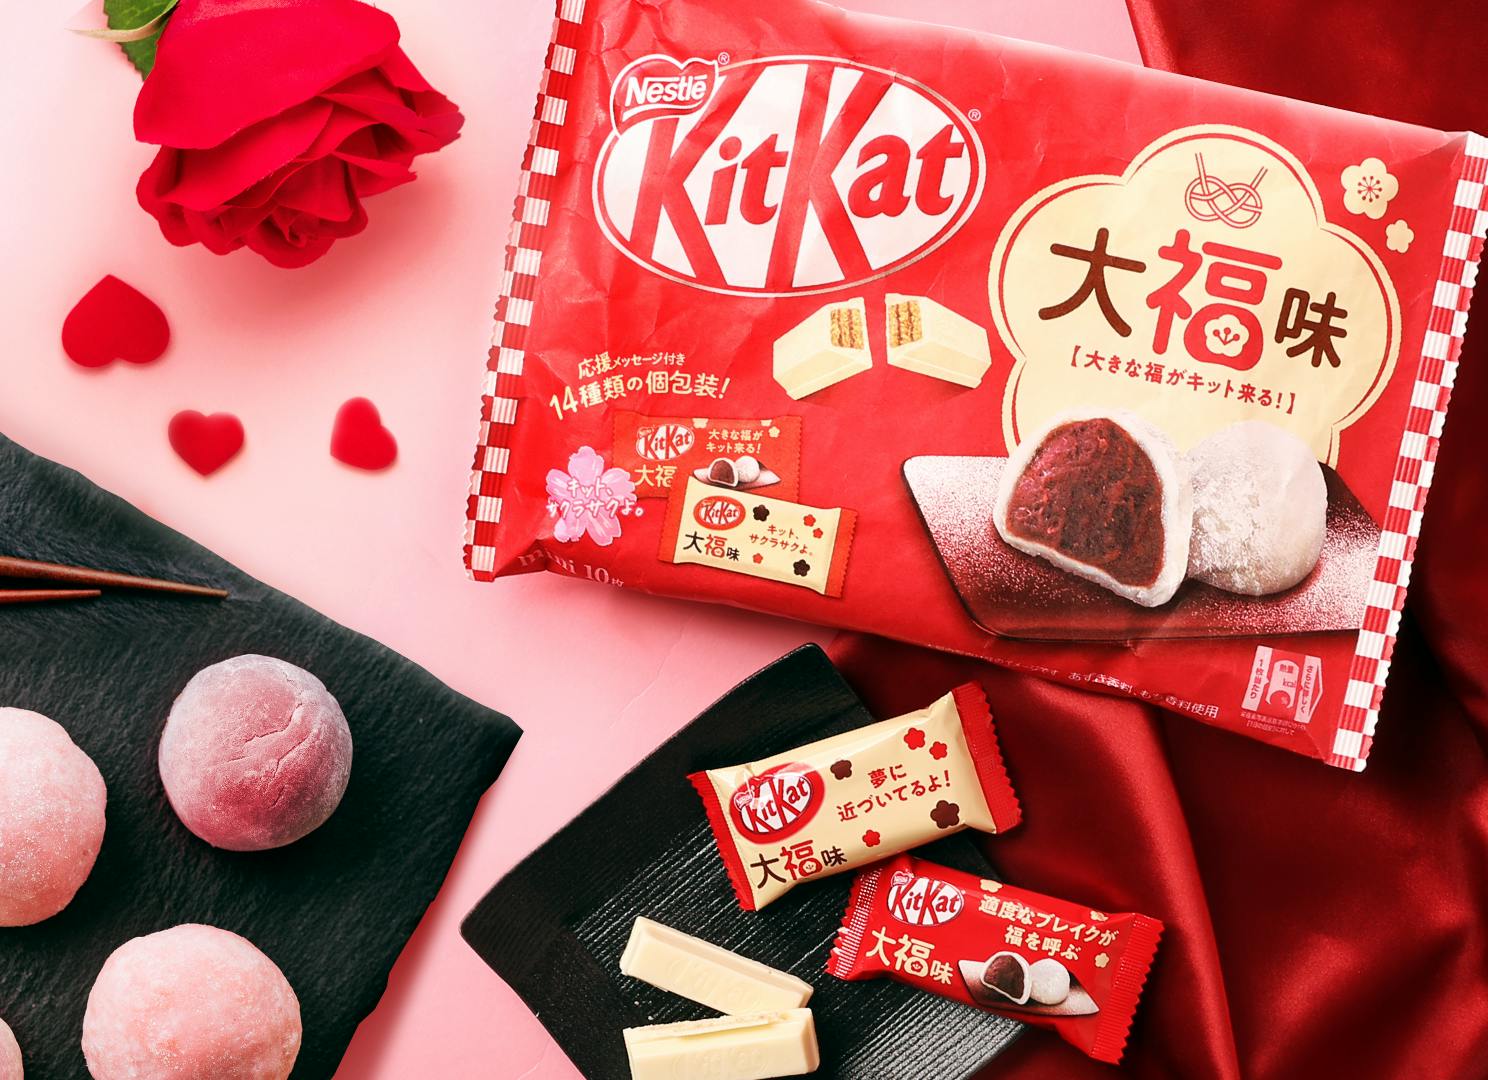 Limited edition Japanese KitKat Mochi Daifuku is displayed with roses and hearts